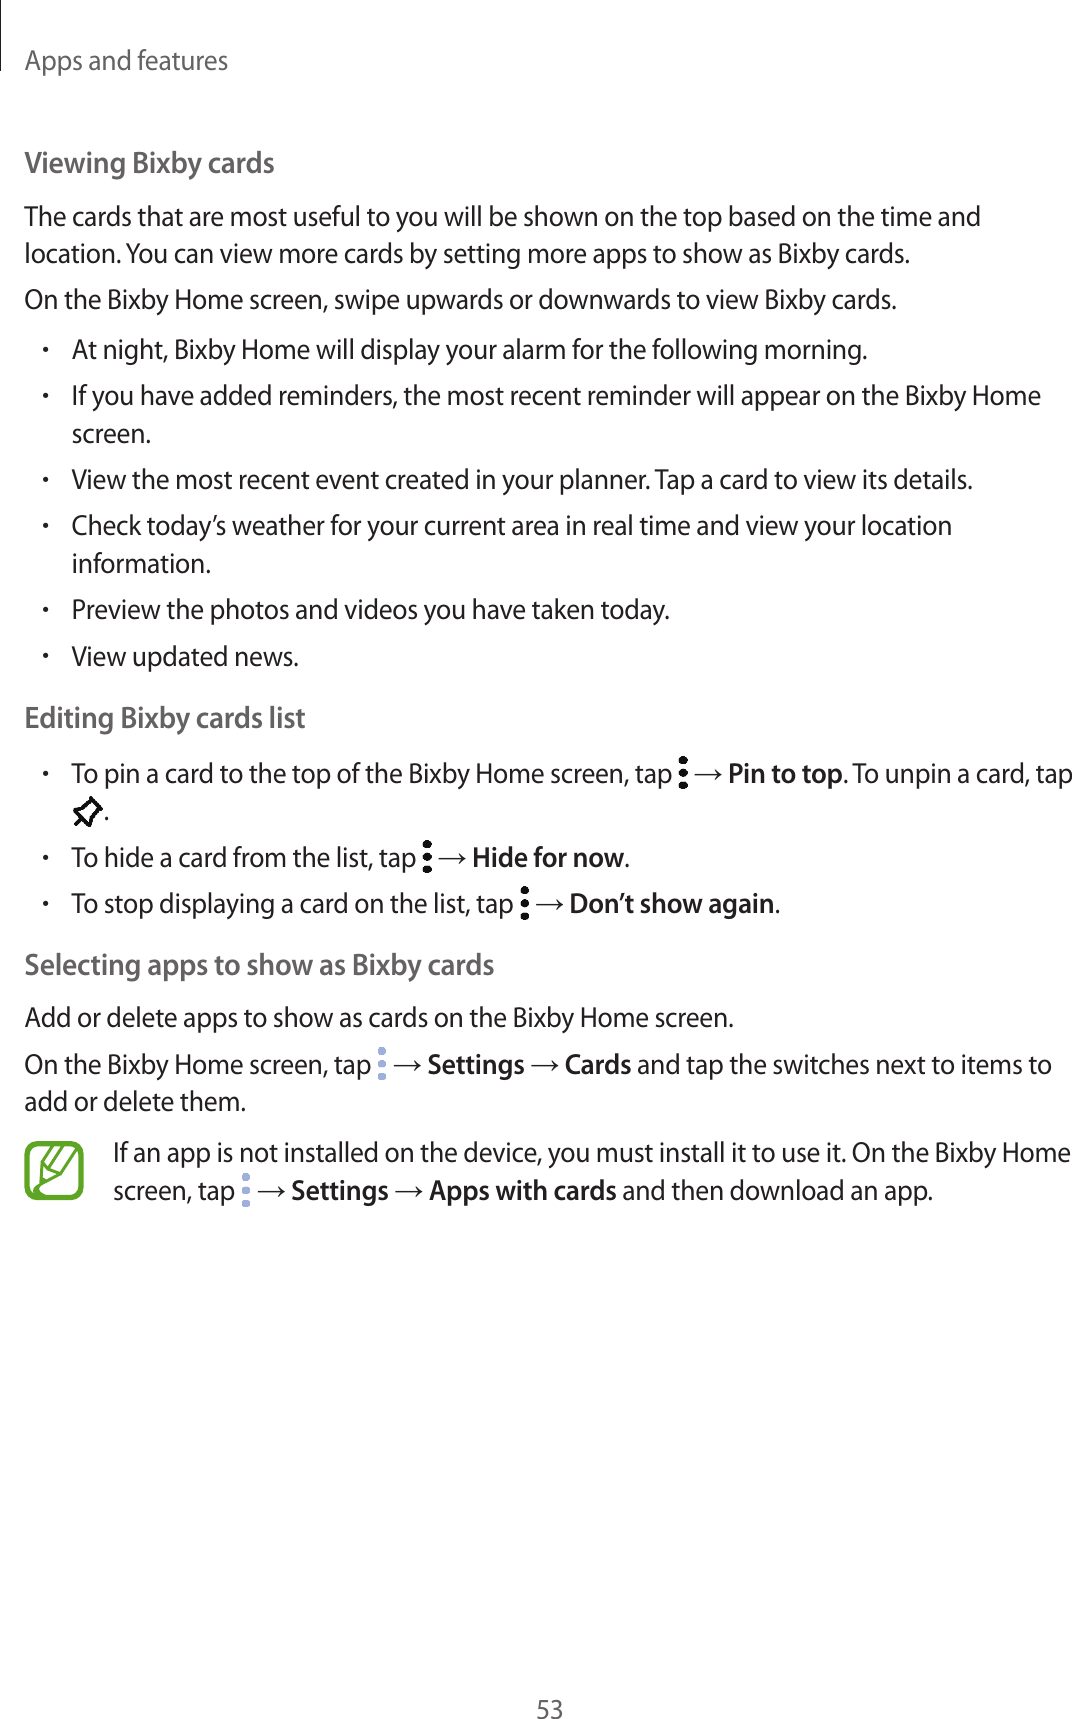 Apps and features53Viewing Bixby cardsThe cards that are most useful to you will be shown on the top based on the time and location. You can view more cards by setting more apps to show as Bixby cards.On the Bixby Home screen, swipe upwards or downwards to view Bixby cards.•At night, Bixby Home will display your alarm for the following morning.•If you have added reminders, the most recent reminder will appear on the Bixby Home screen.•View the most recent event created in your planner. Tap a card to view its details.•Check today’s weather for your current area in real time and view your location information.•Preview the photos and videos you have taken today.•View updated news.Editing Bixby cards list•To pin a card to the top of the Bixby Home screen, tap   → Pin to top. To unpin a card, tap .•To hide a card from the list, tap   → Hide for now.•To stop displaying a card on the list, tap   → Don’t show again.Selecting apps to show as Bixby cardsAdd or delete apps to show as cards on the Bixby Home screen.On the Bixby Home screen, tap   → Settings → Cards and tap the switches next to items to add or delete them.If an app is not installed on the device, you must install it to use it. On the Bixby Home screen, tap   → Settings → Apps with cards and then download an app.